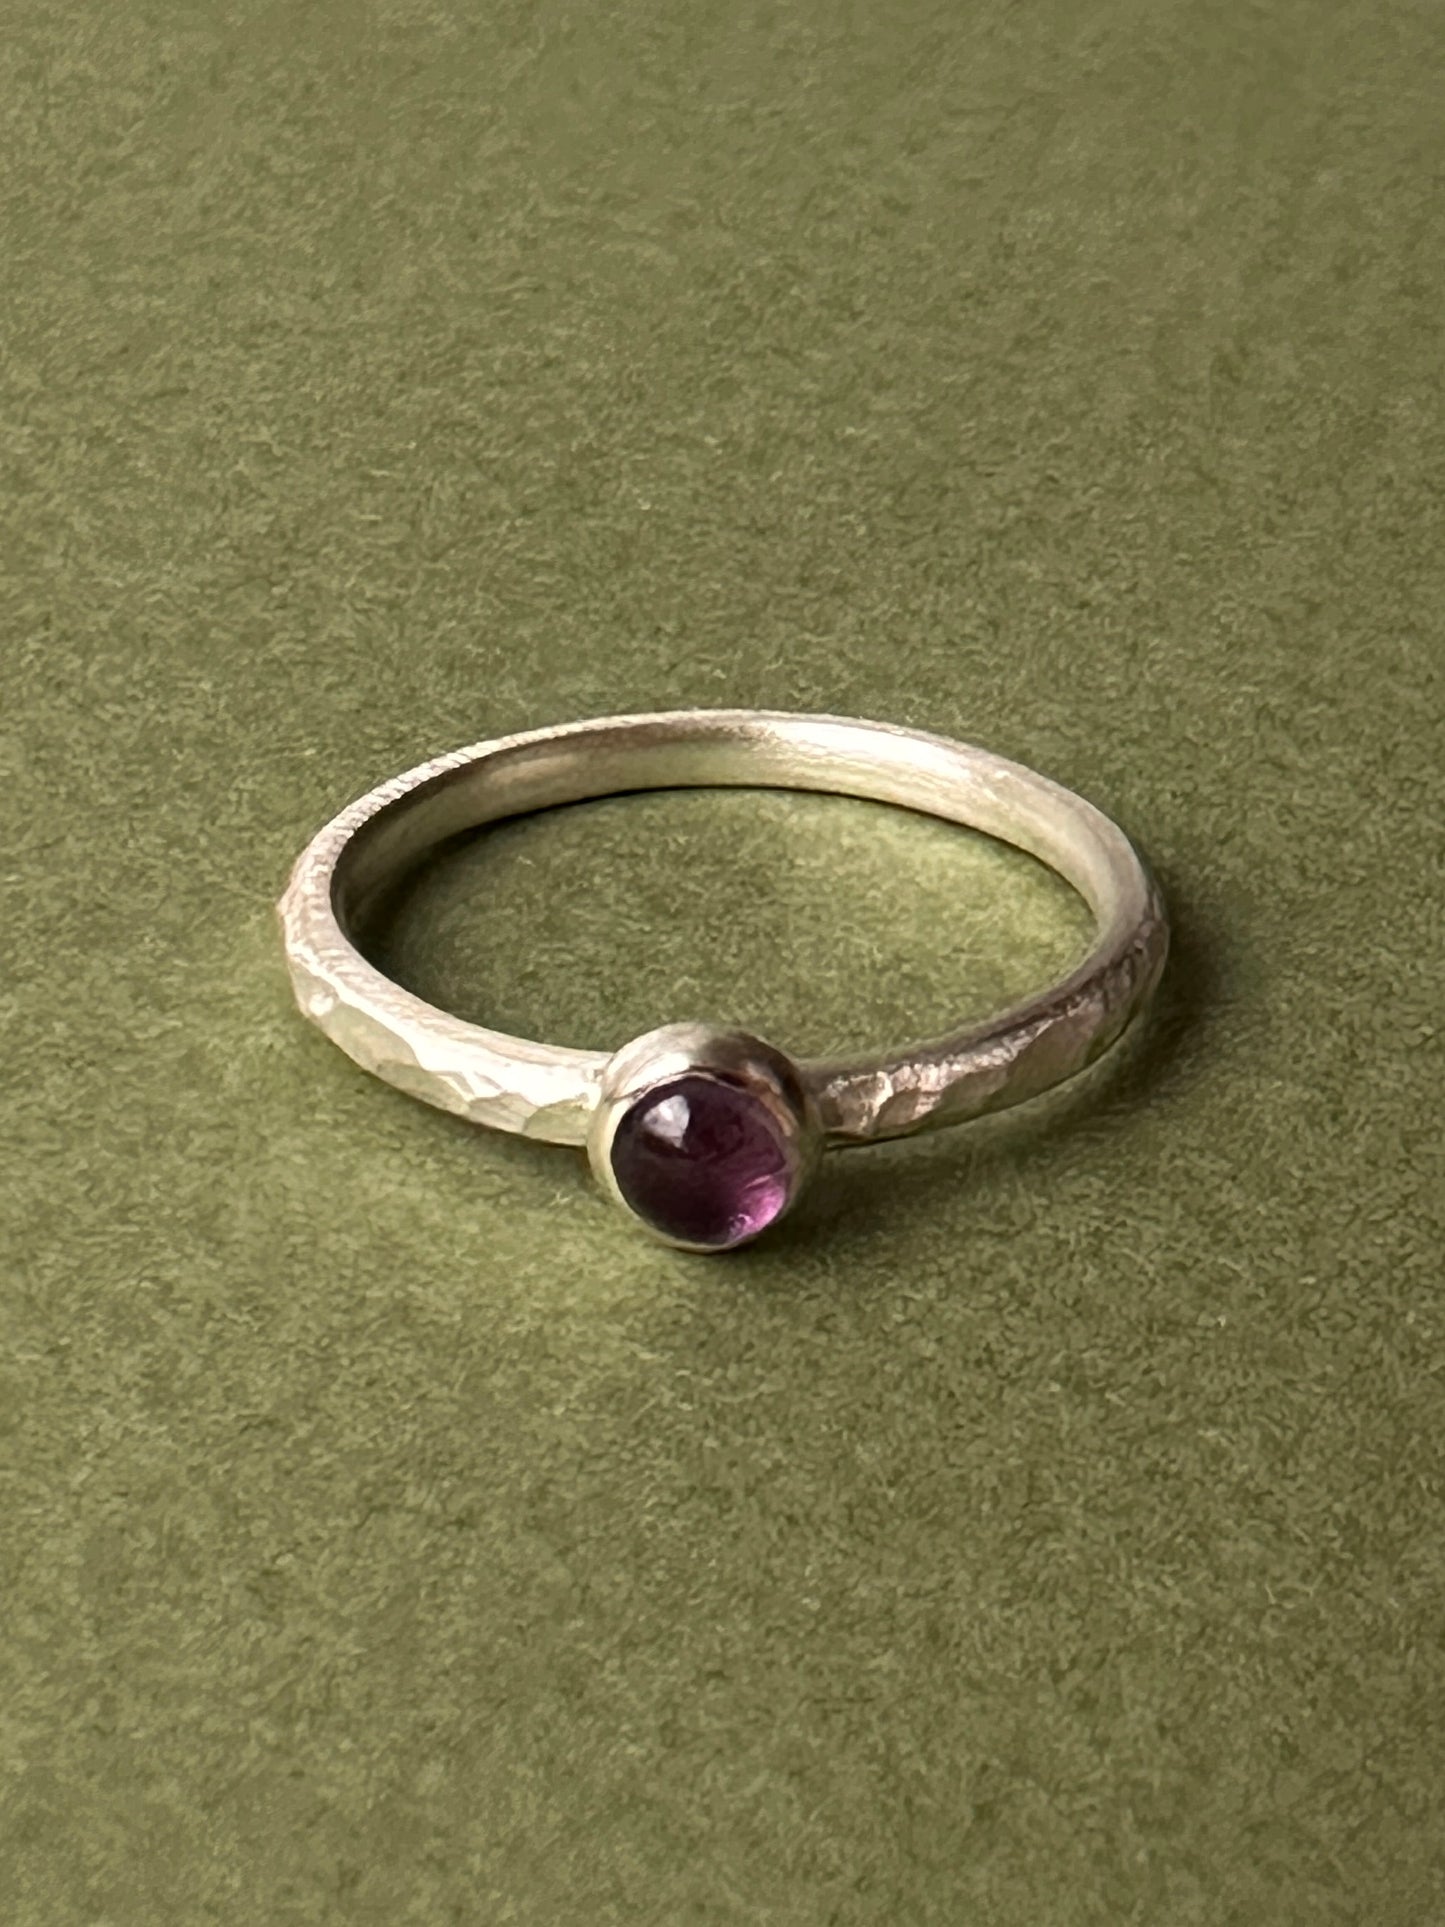 Ring "VIOLET" with amethyst